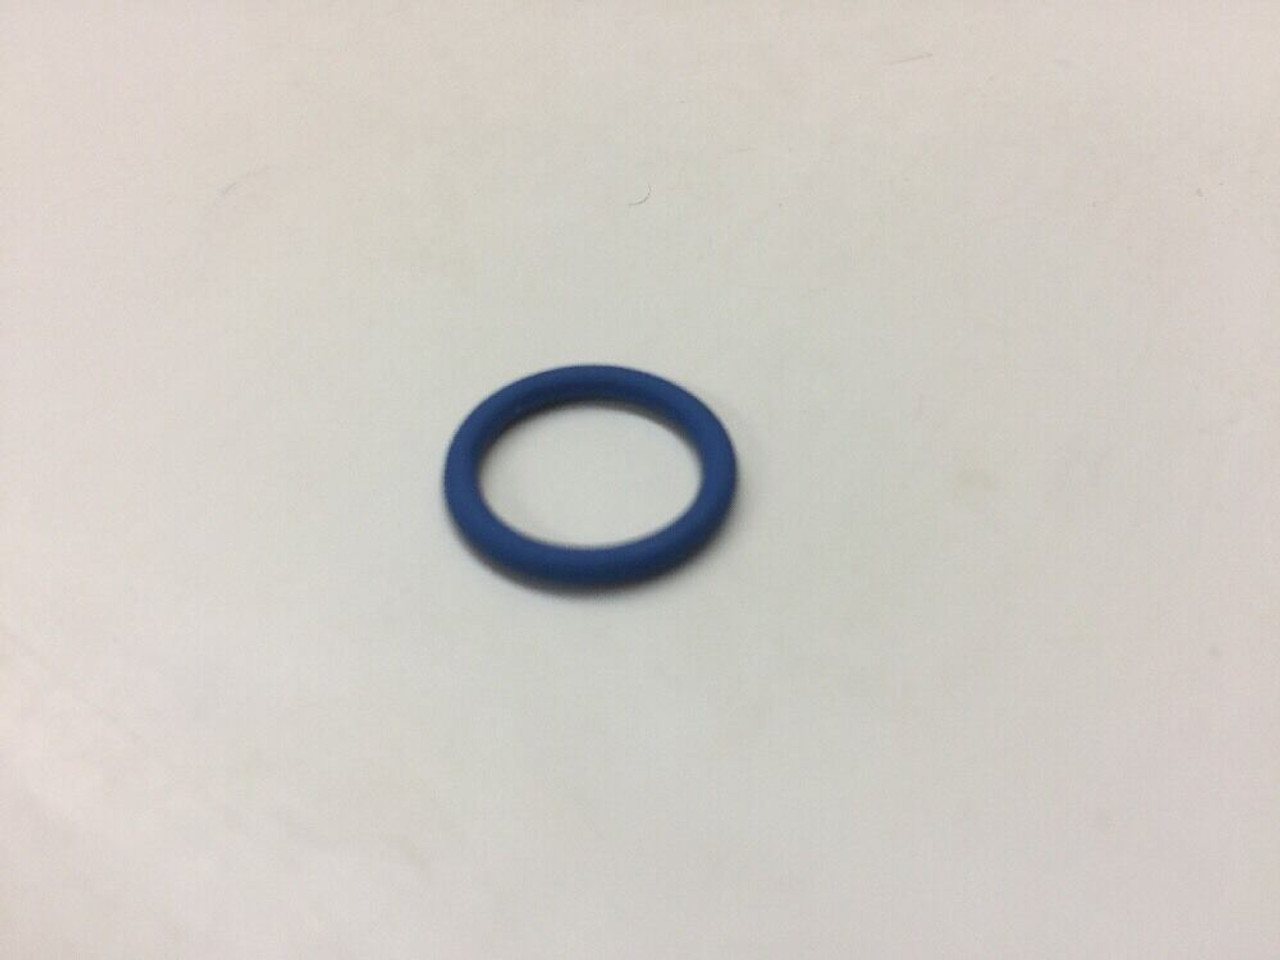 O-Ring M25988/2-906 Blue Rubber Lot of 10